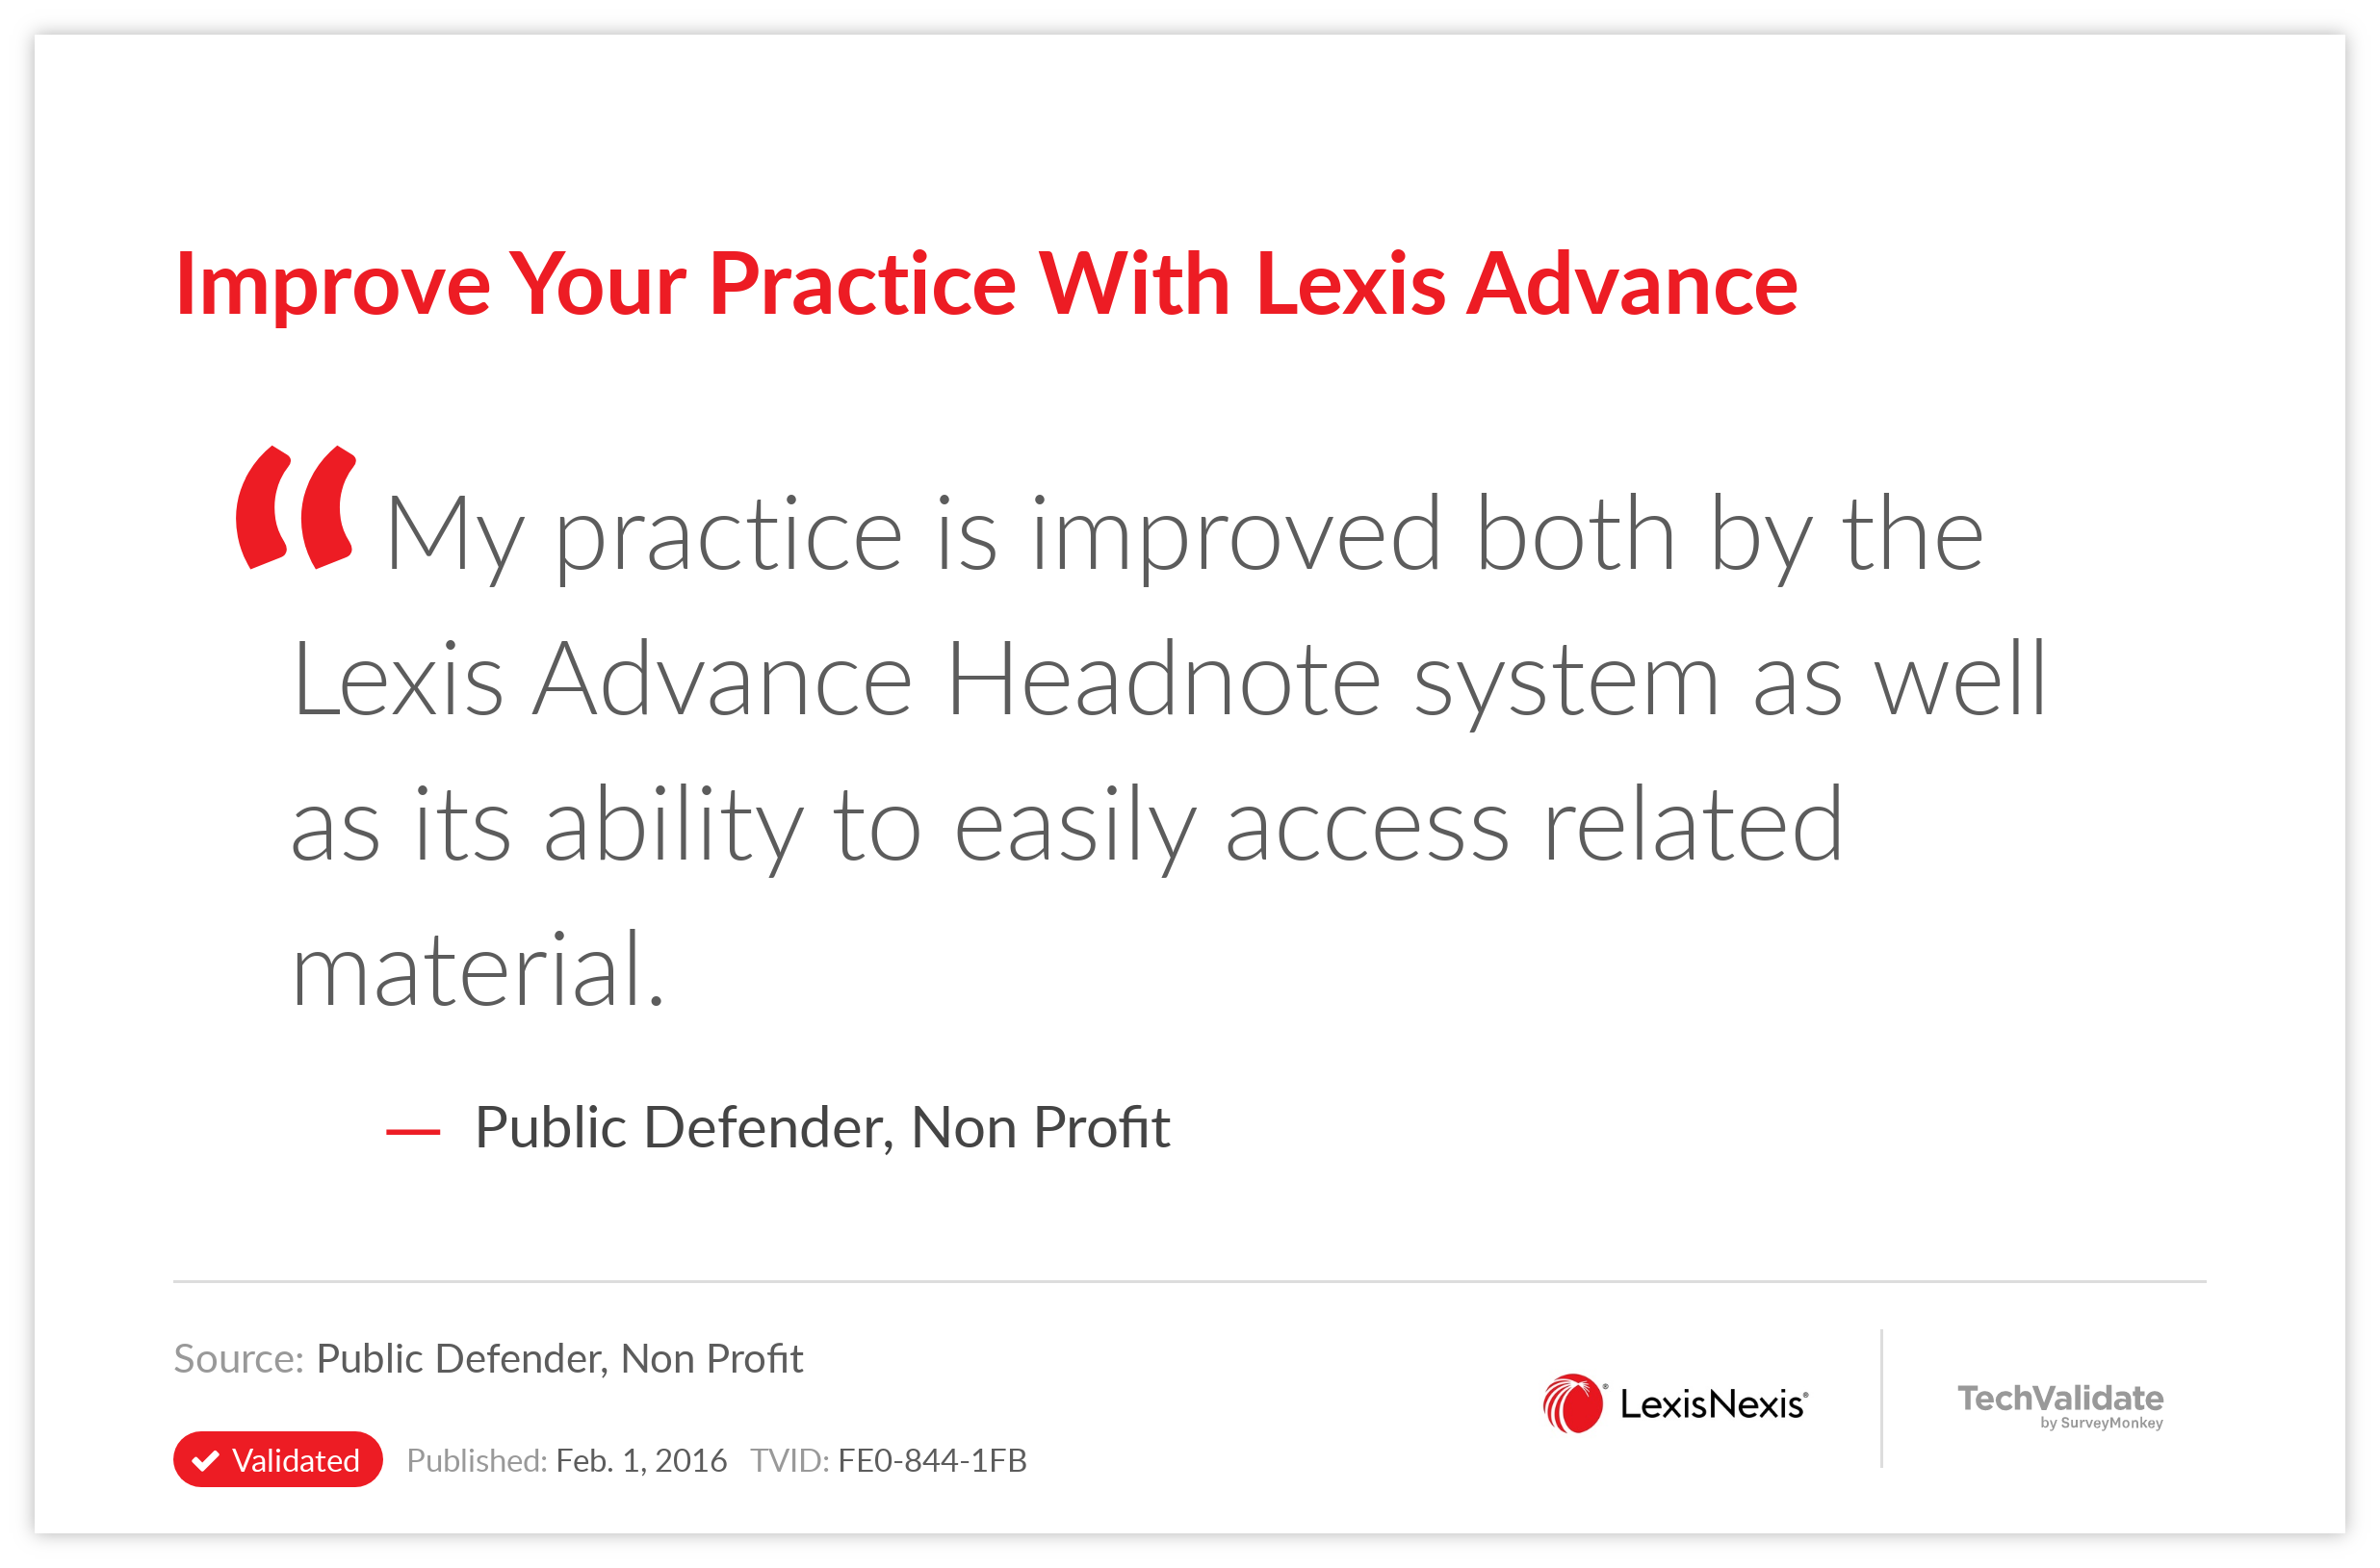 Improve Your Practice With Lexis Advance